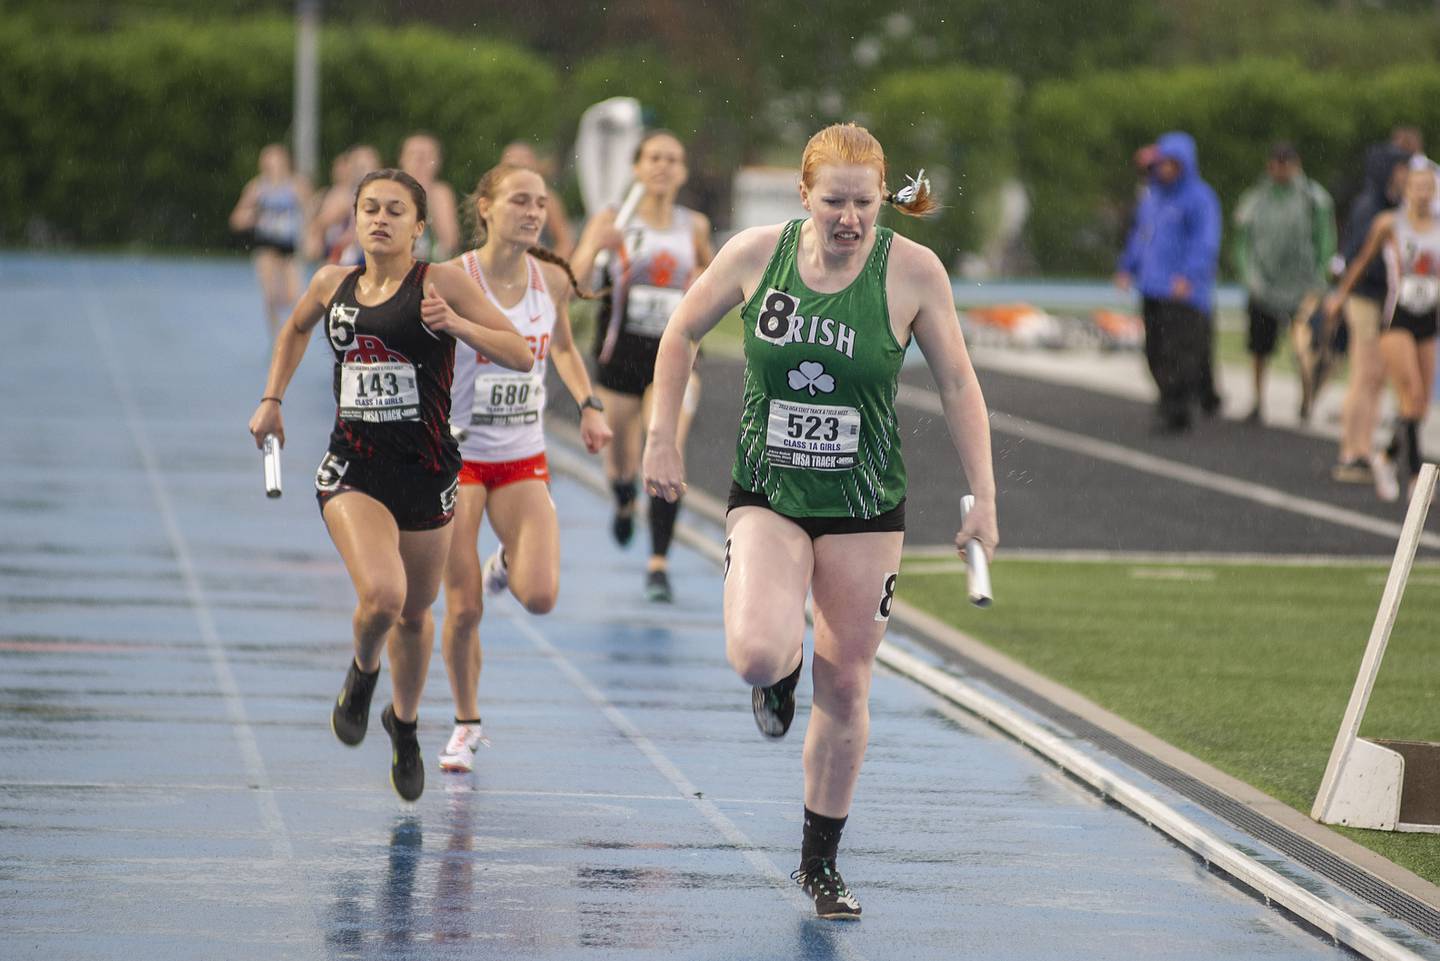 Seneca's Emma Smith leans across the finish to complete the Irish's championship of the 1A 4x400 finals during the IHSA girls state championships, Saturday, May 21, 2022 in Charleston.